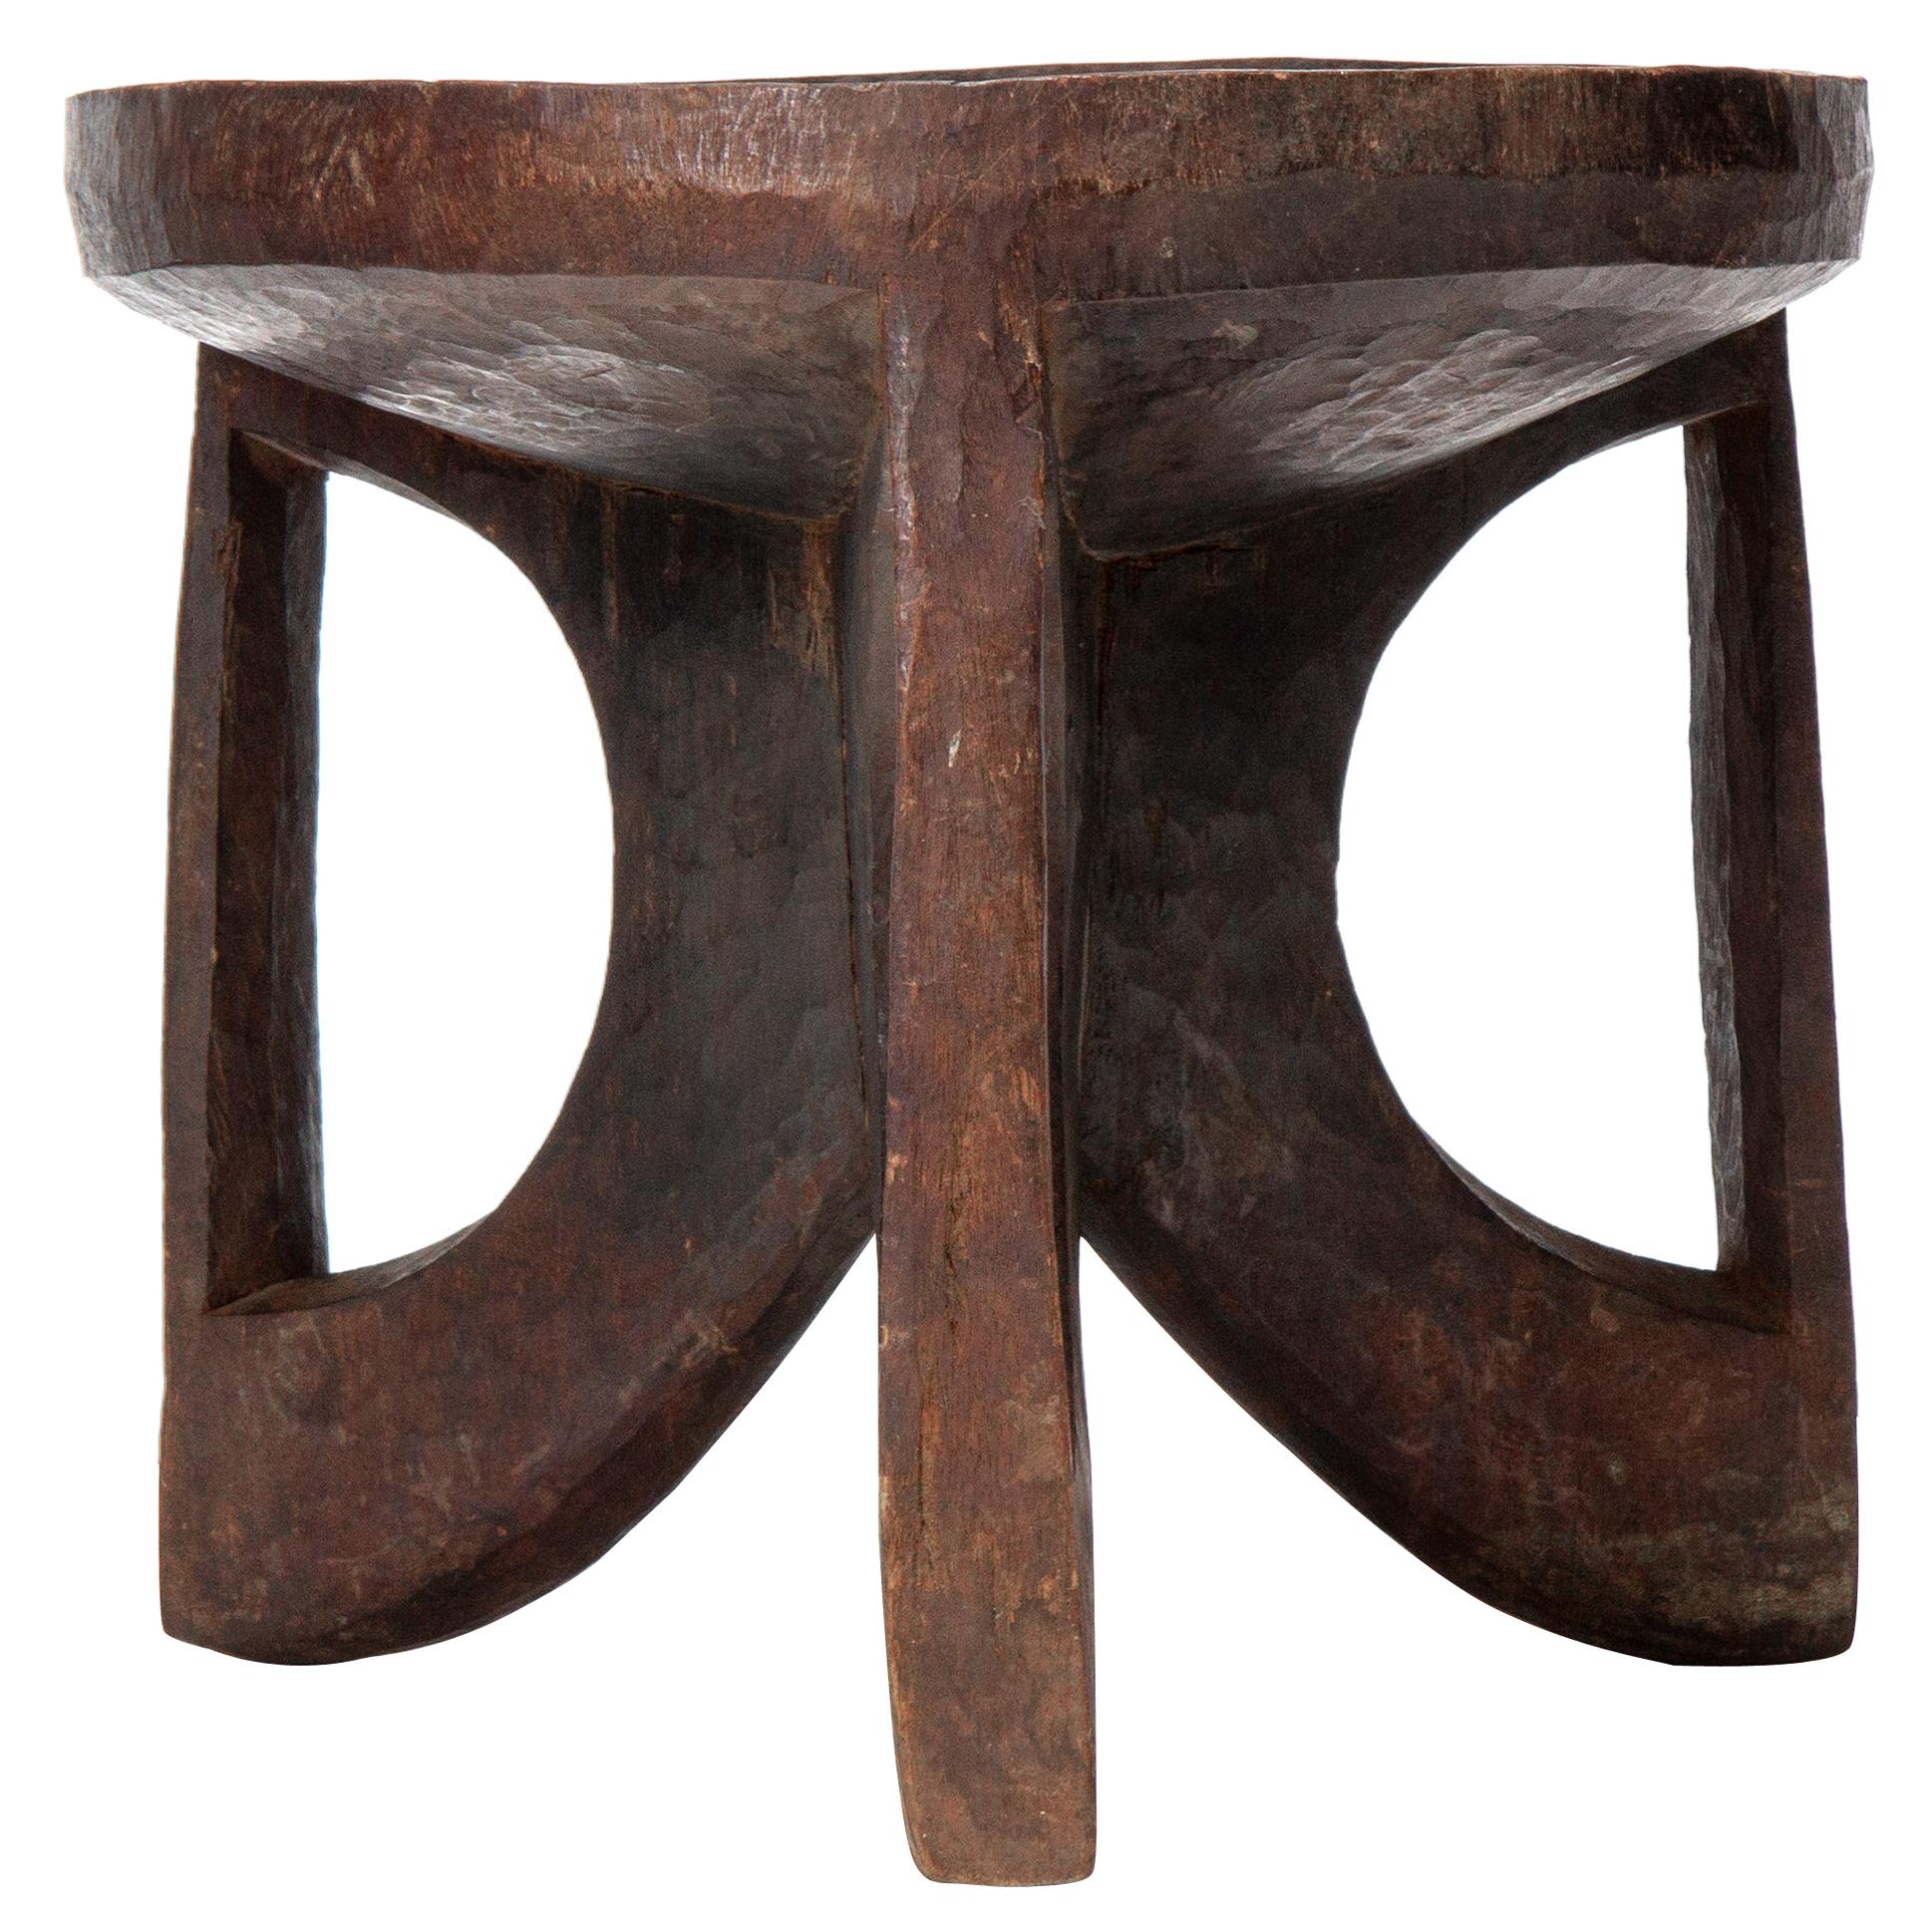 1900s Ethiopian Carved Tribal Stool